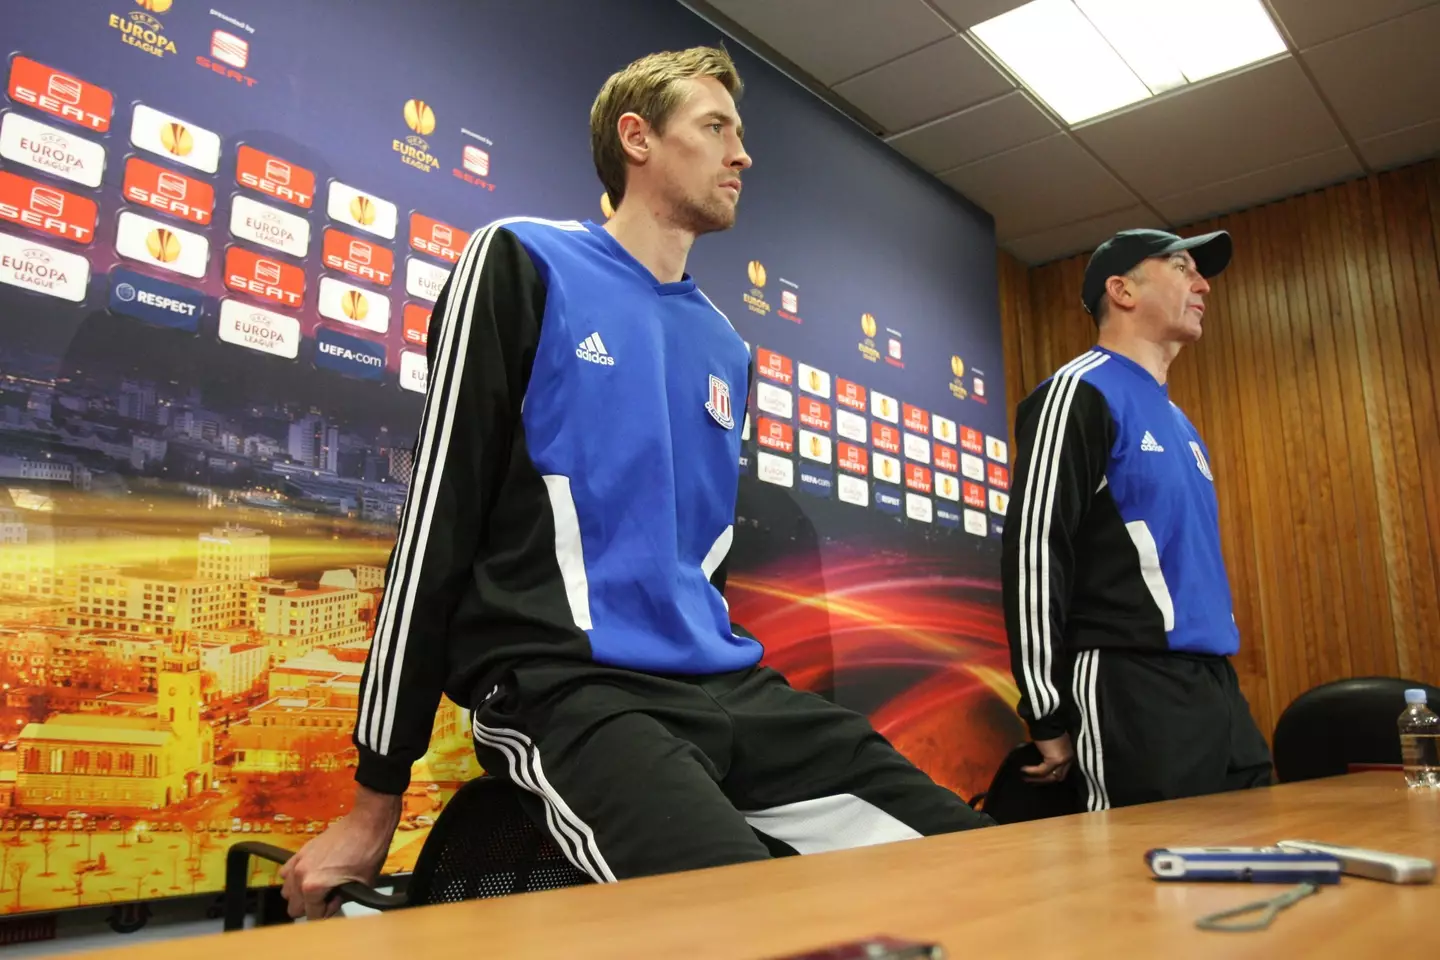 Crouch and Pulis at a press conference. (Image